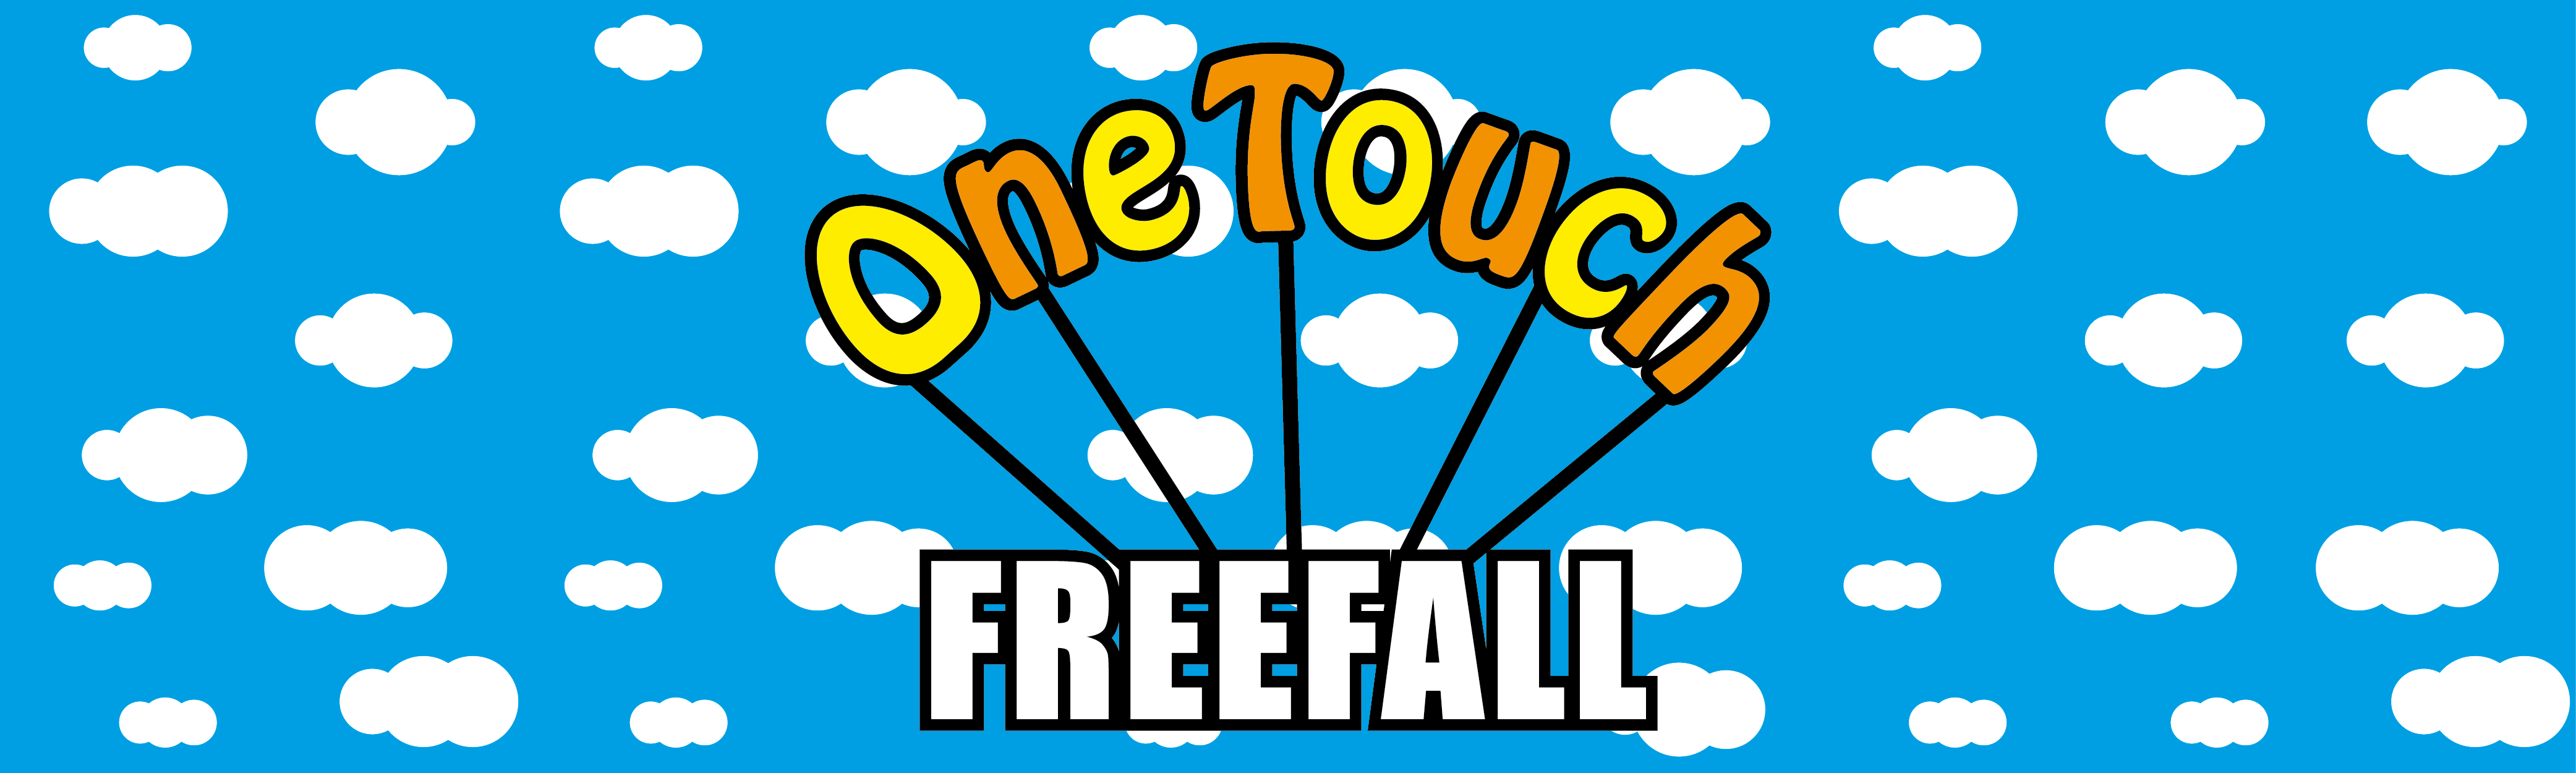 One touch Freefall